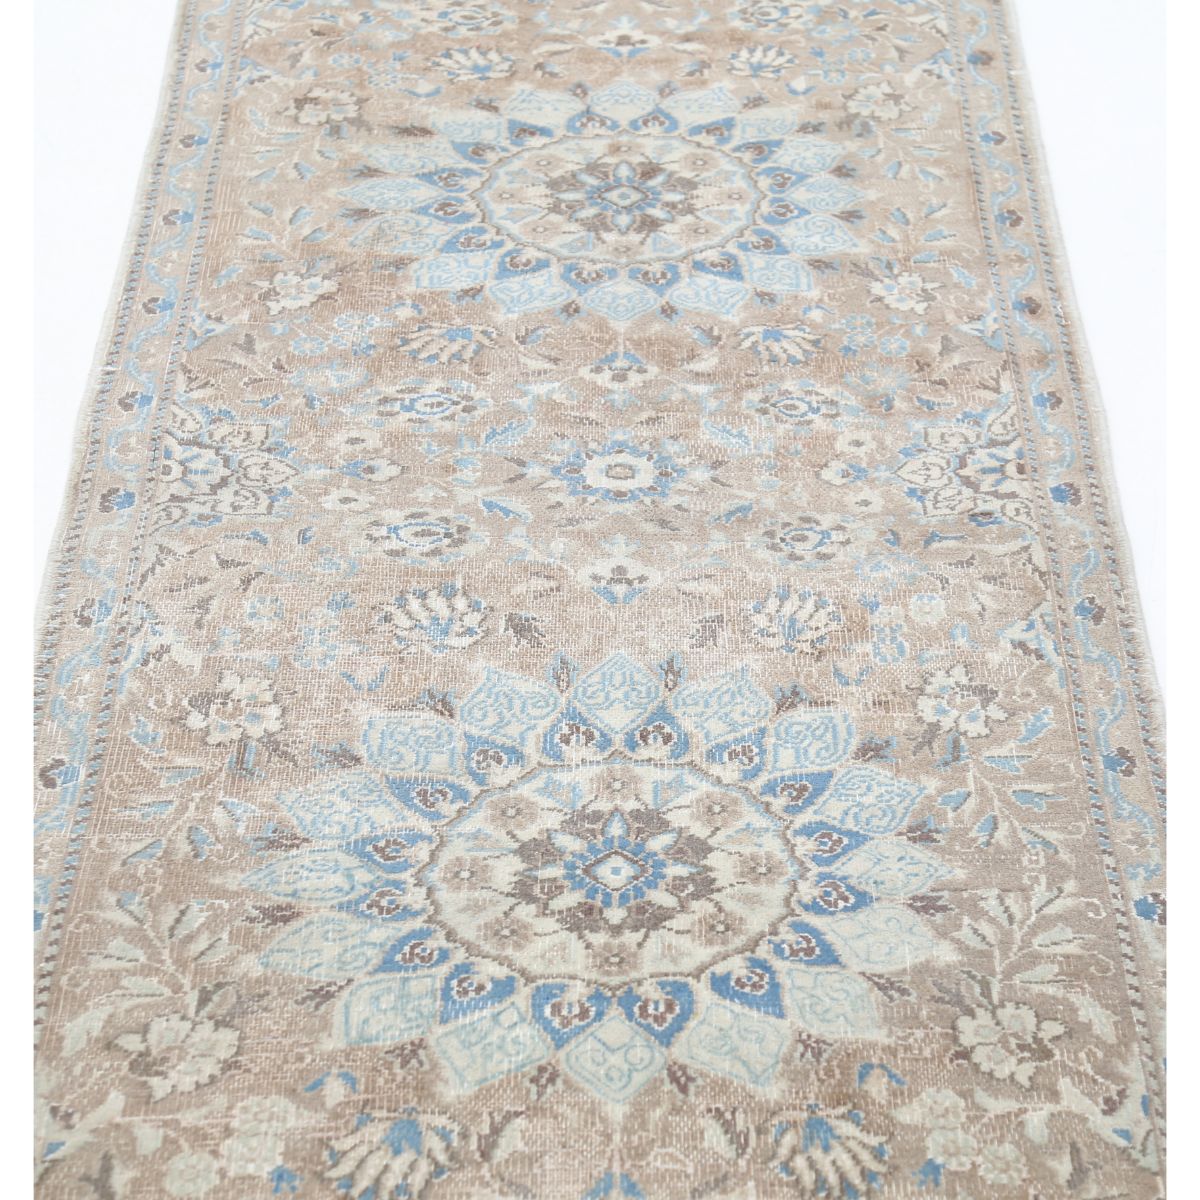 Vintage 2'6" X 12'4" Wool Hand-Knotted Rug